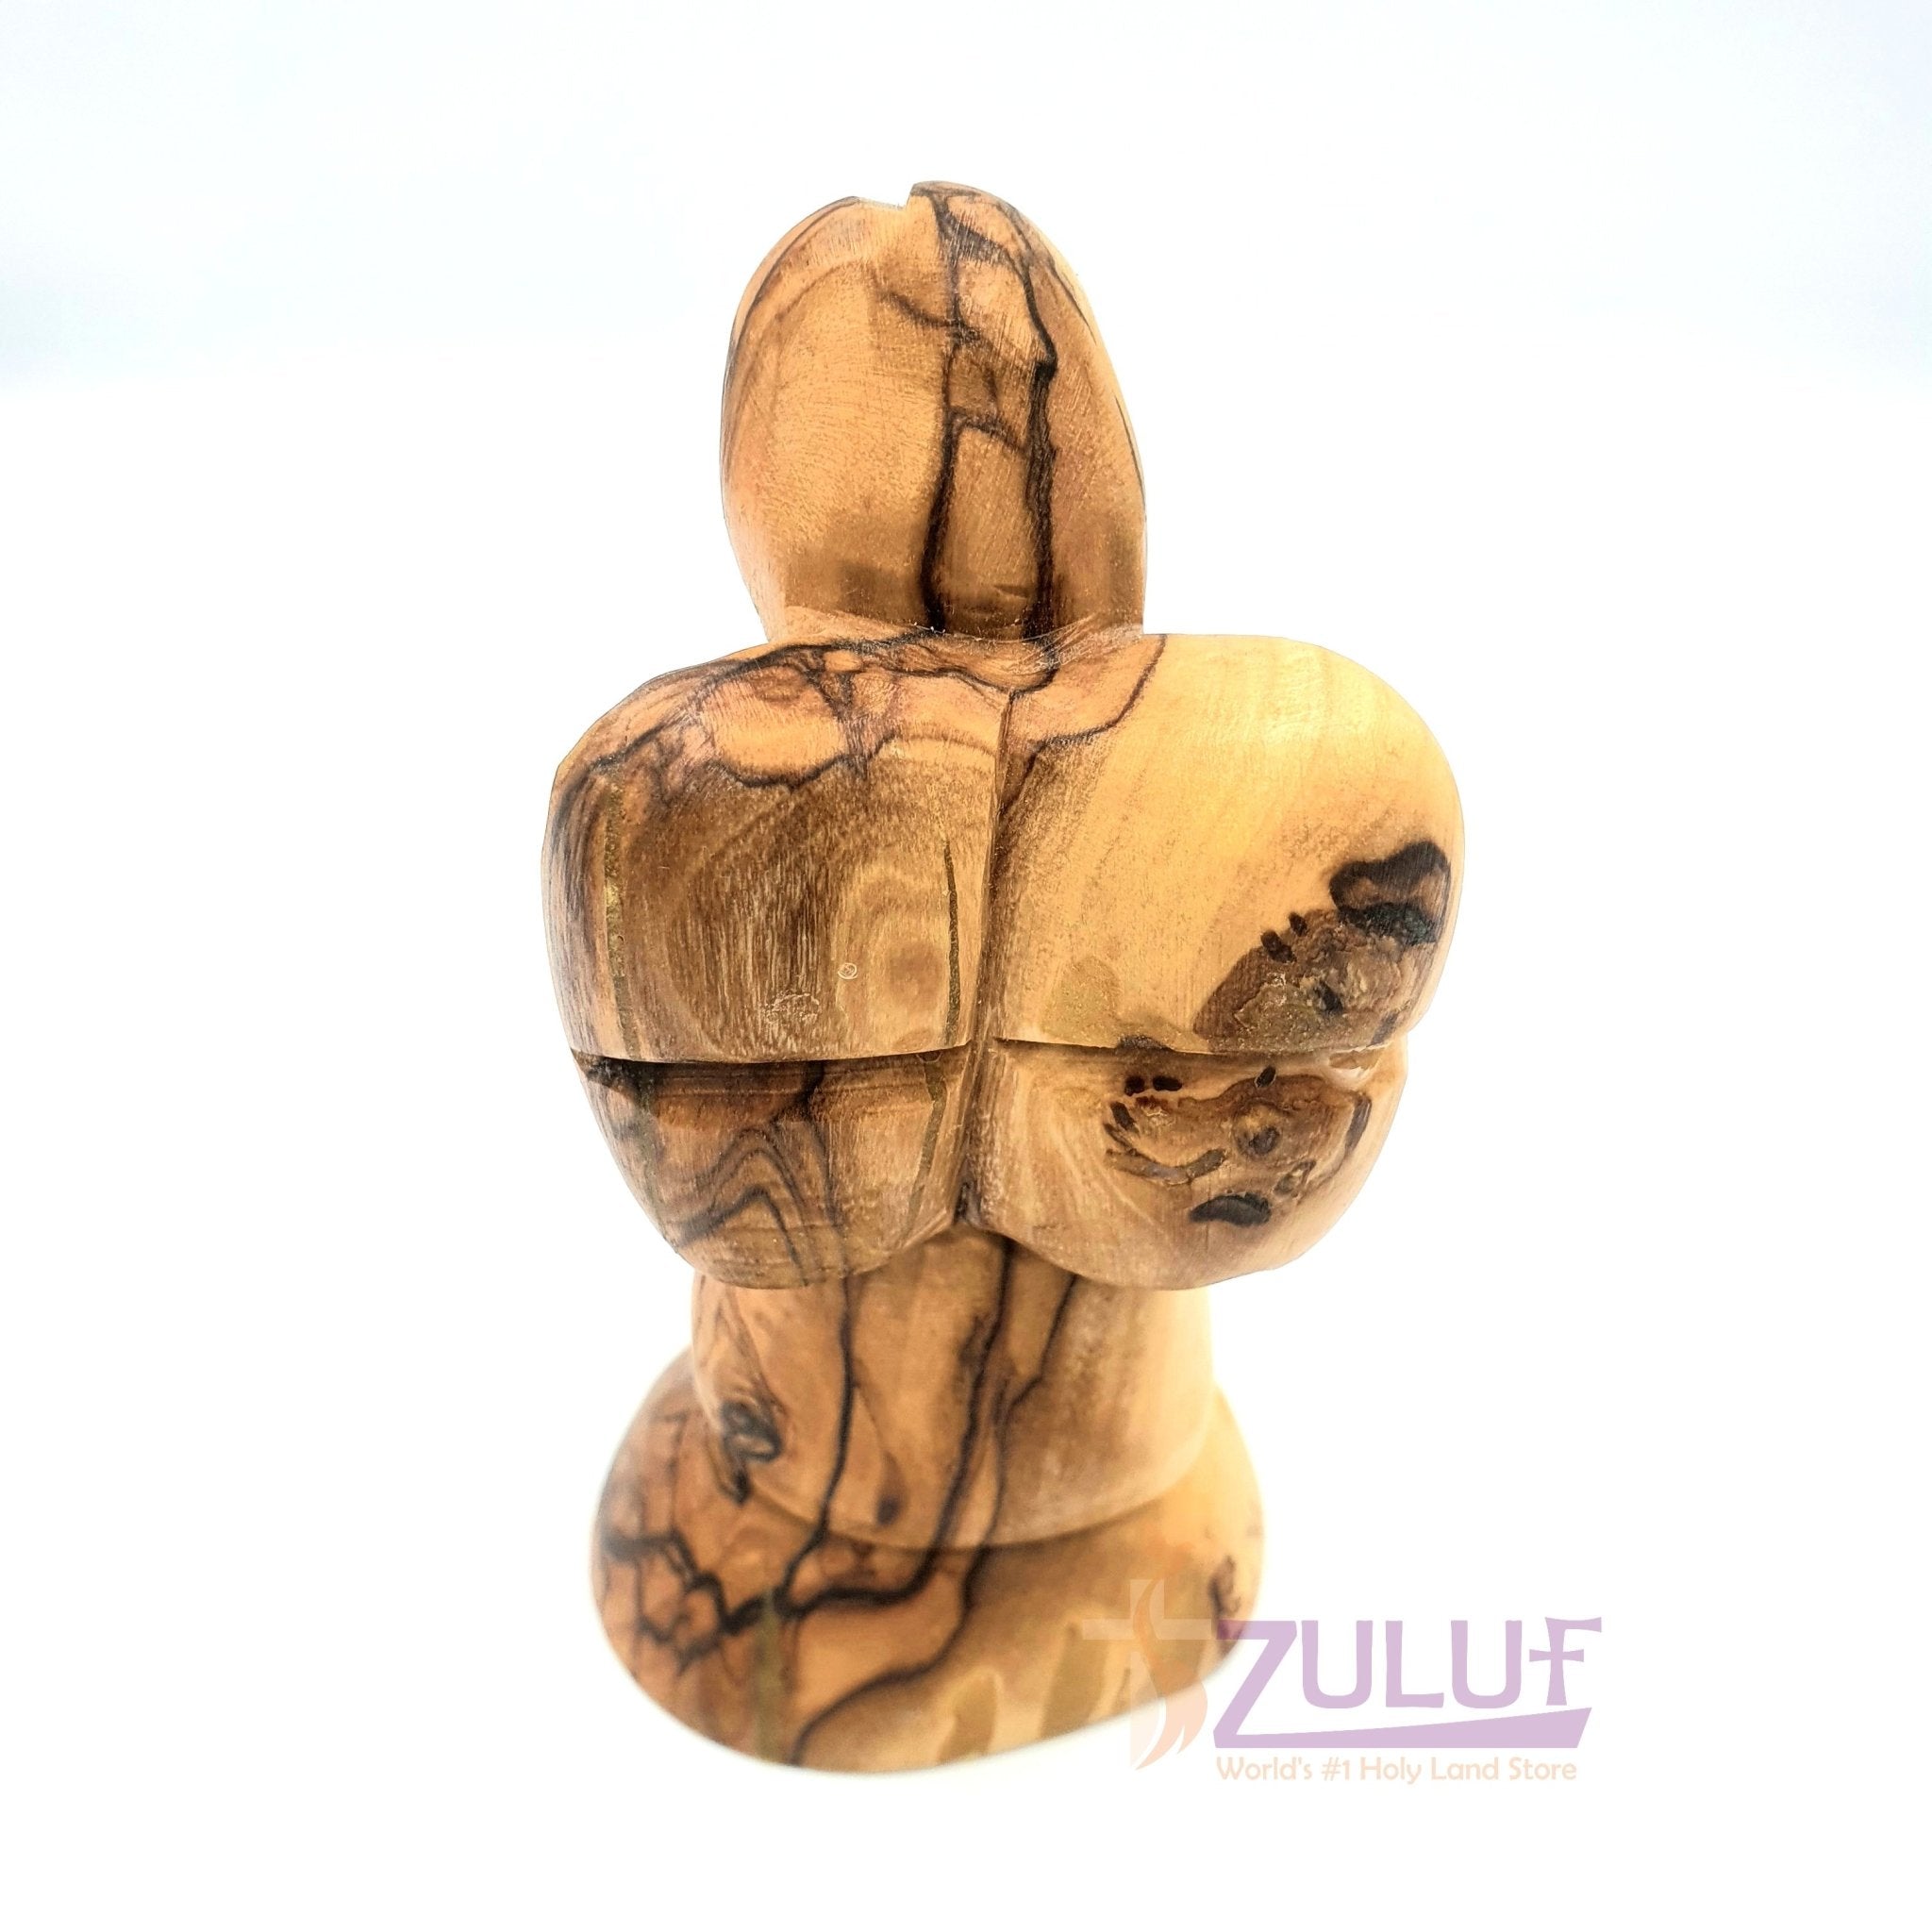 Authentic Hand Carved Olive Wood Christmas Little Praying Angel Holy Land ANG028 - Zuluf